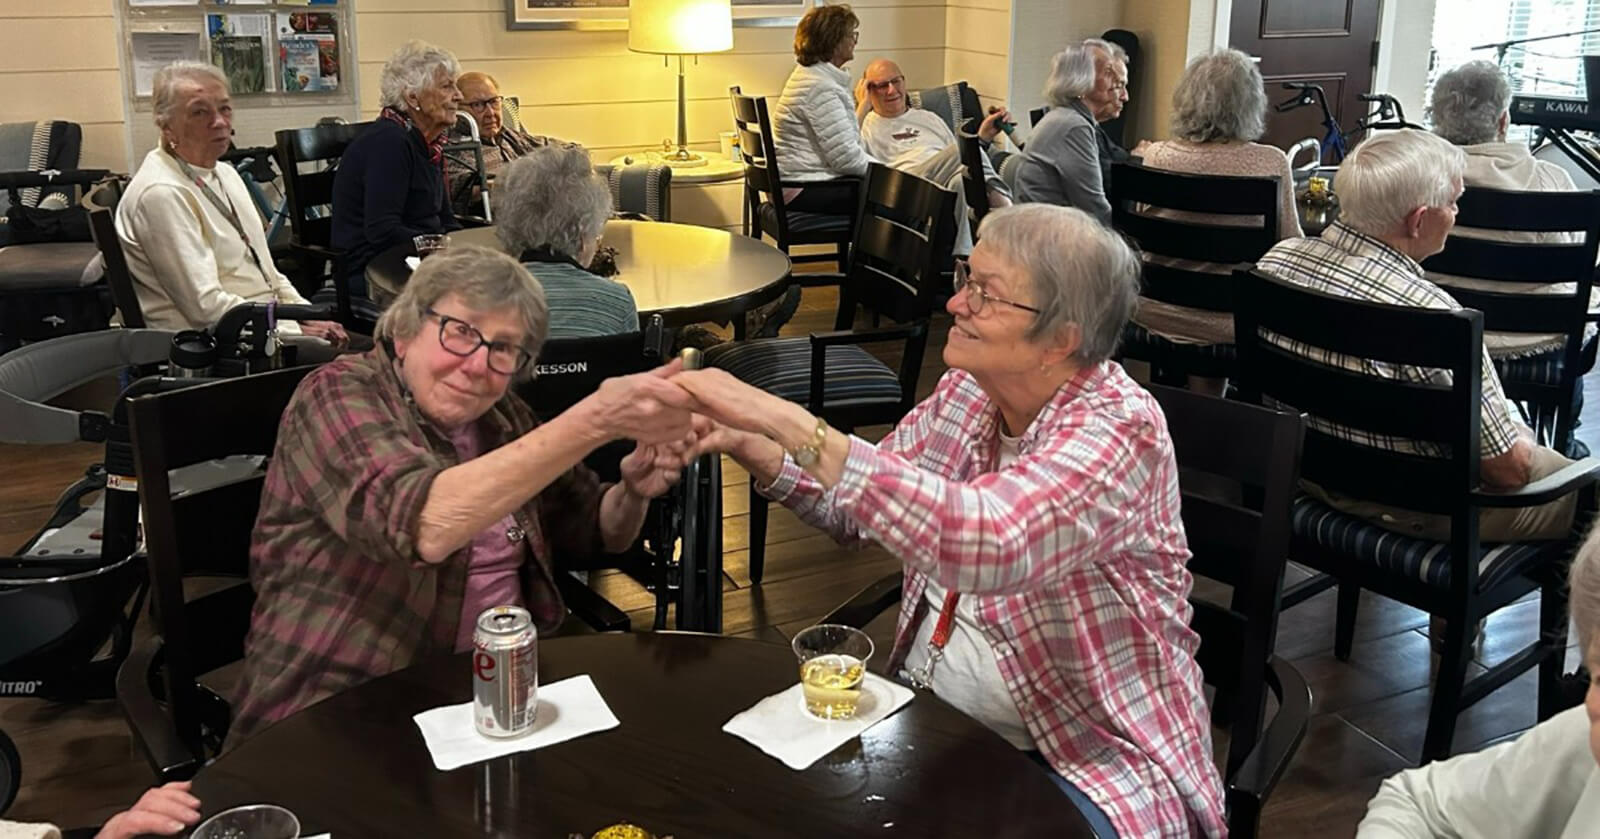 Two senior residents sharing a hand holding moment in the lounge area at The Waters of White Bear Lake